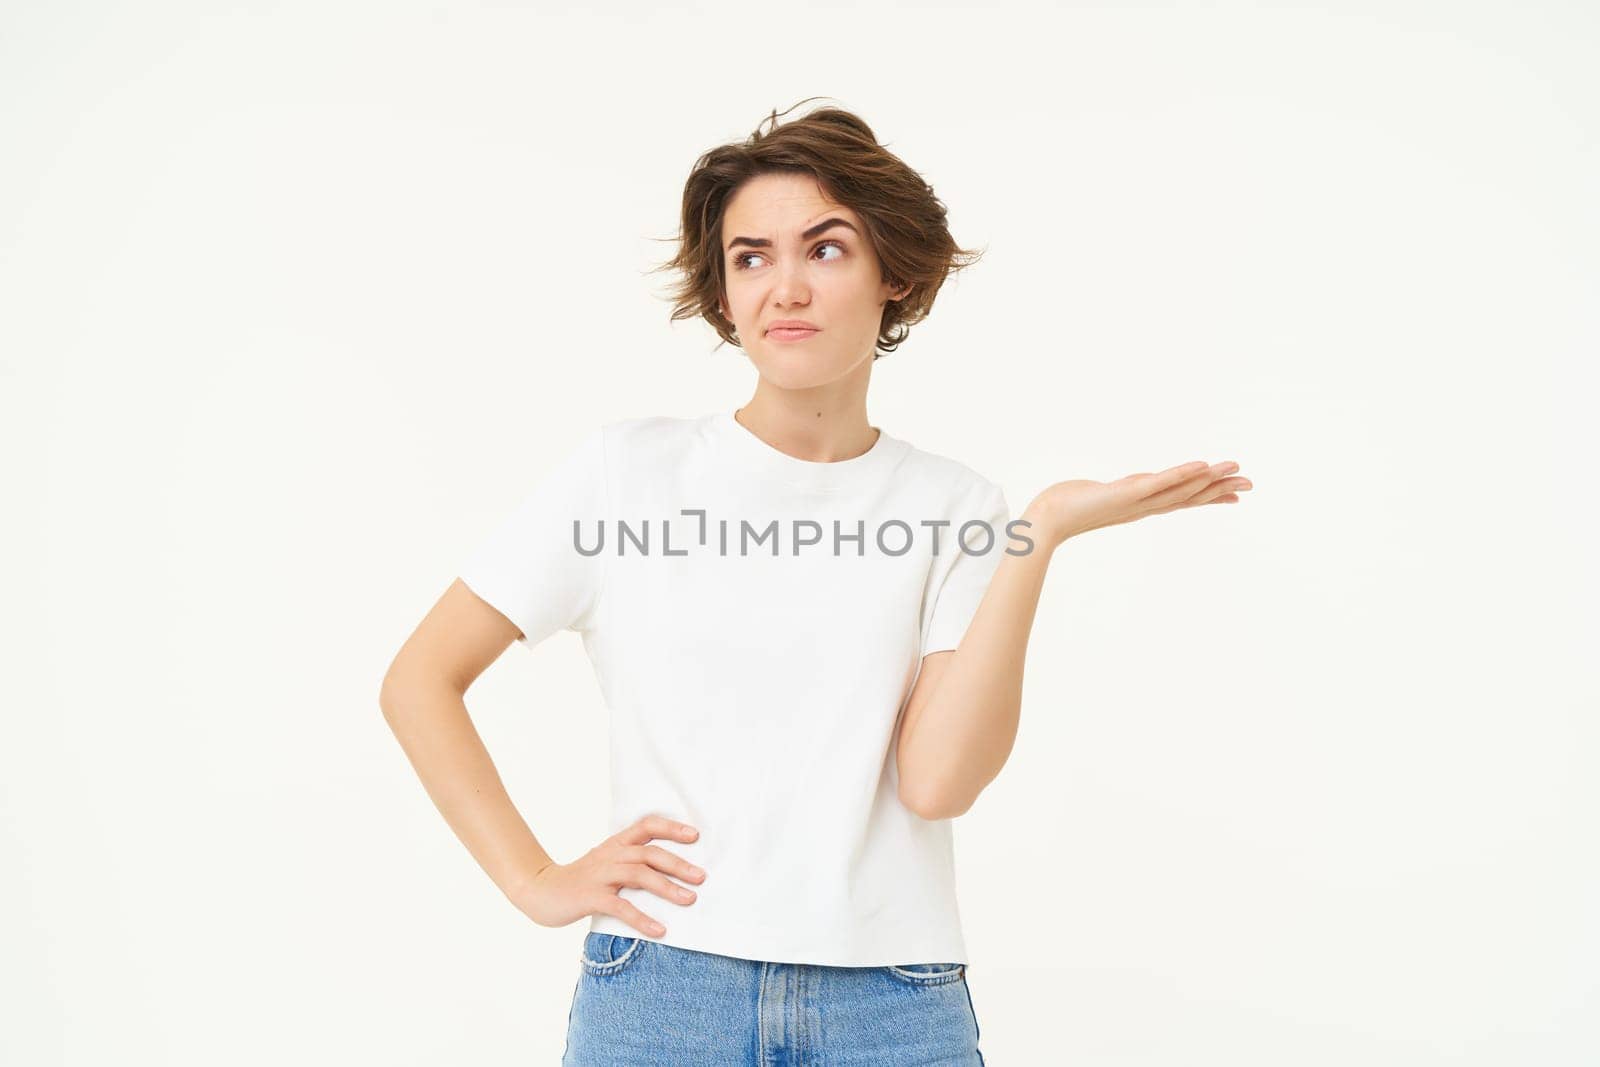 So what. Frustrated, upset young woman, raises one hand and shrugs, looking confused, cant understand something, standing over white background.